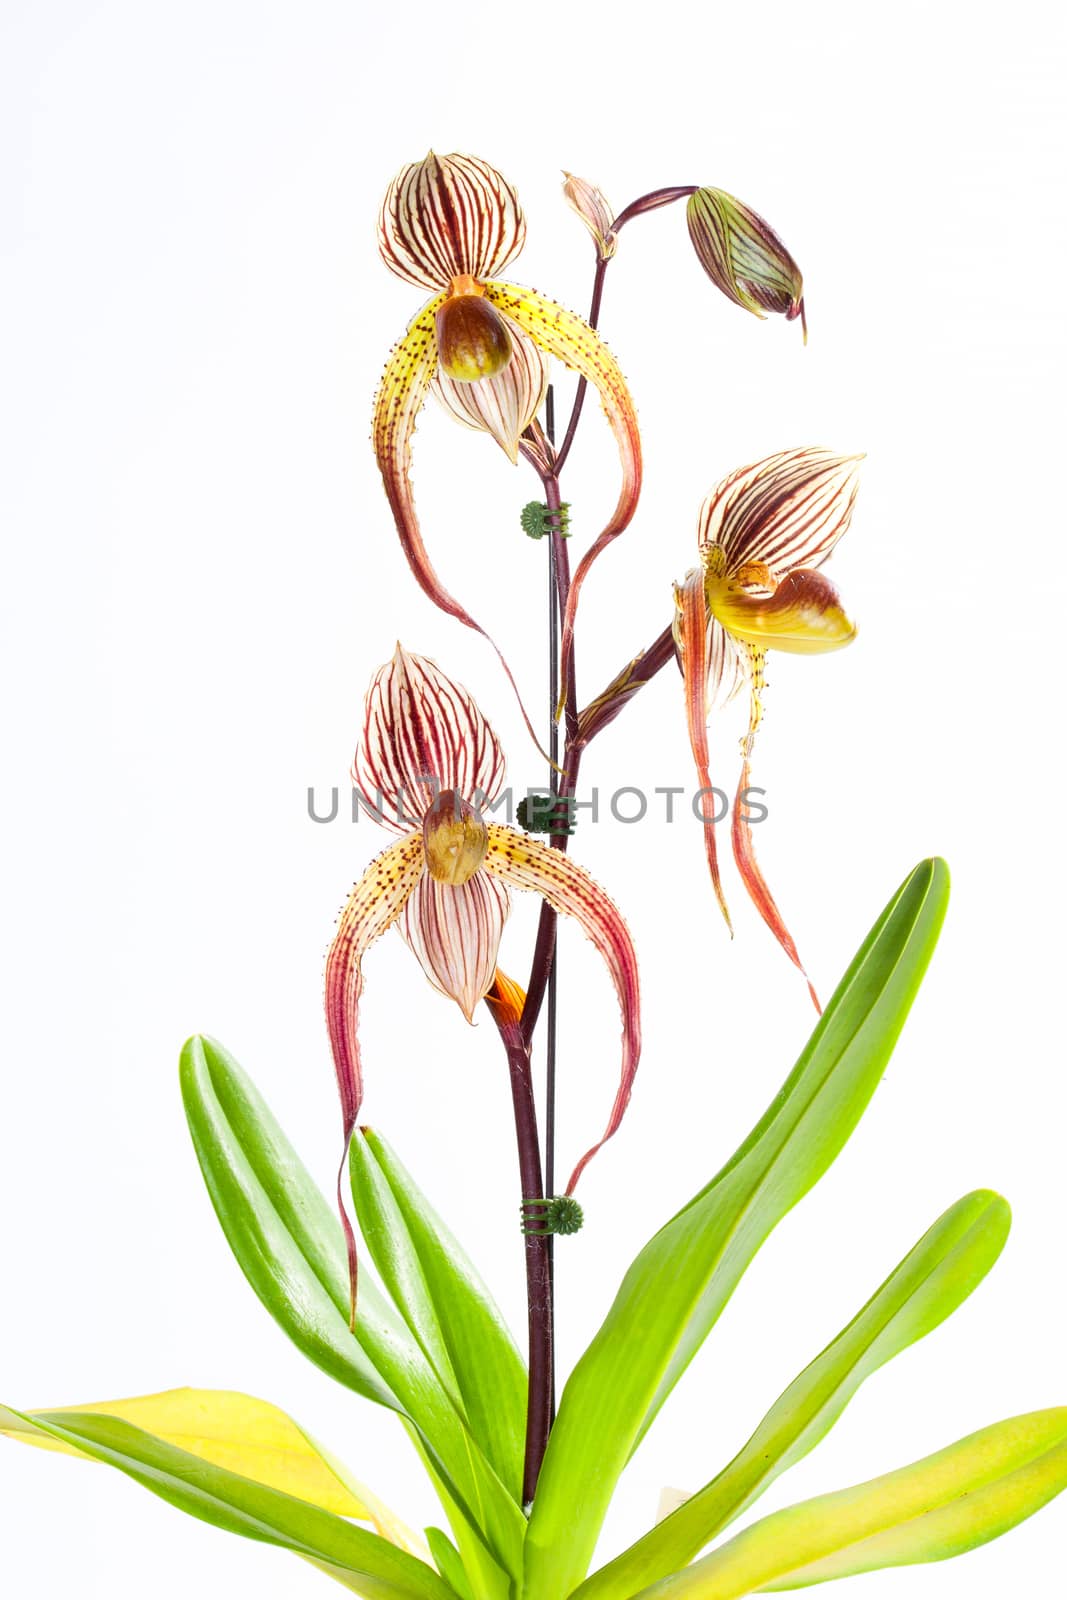 Paphiopedilum Booth's Sand Lady by jee1999